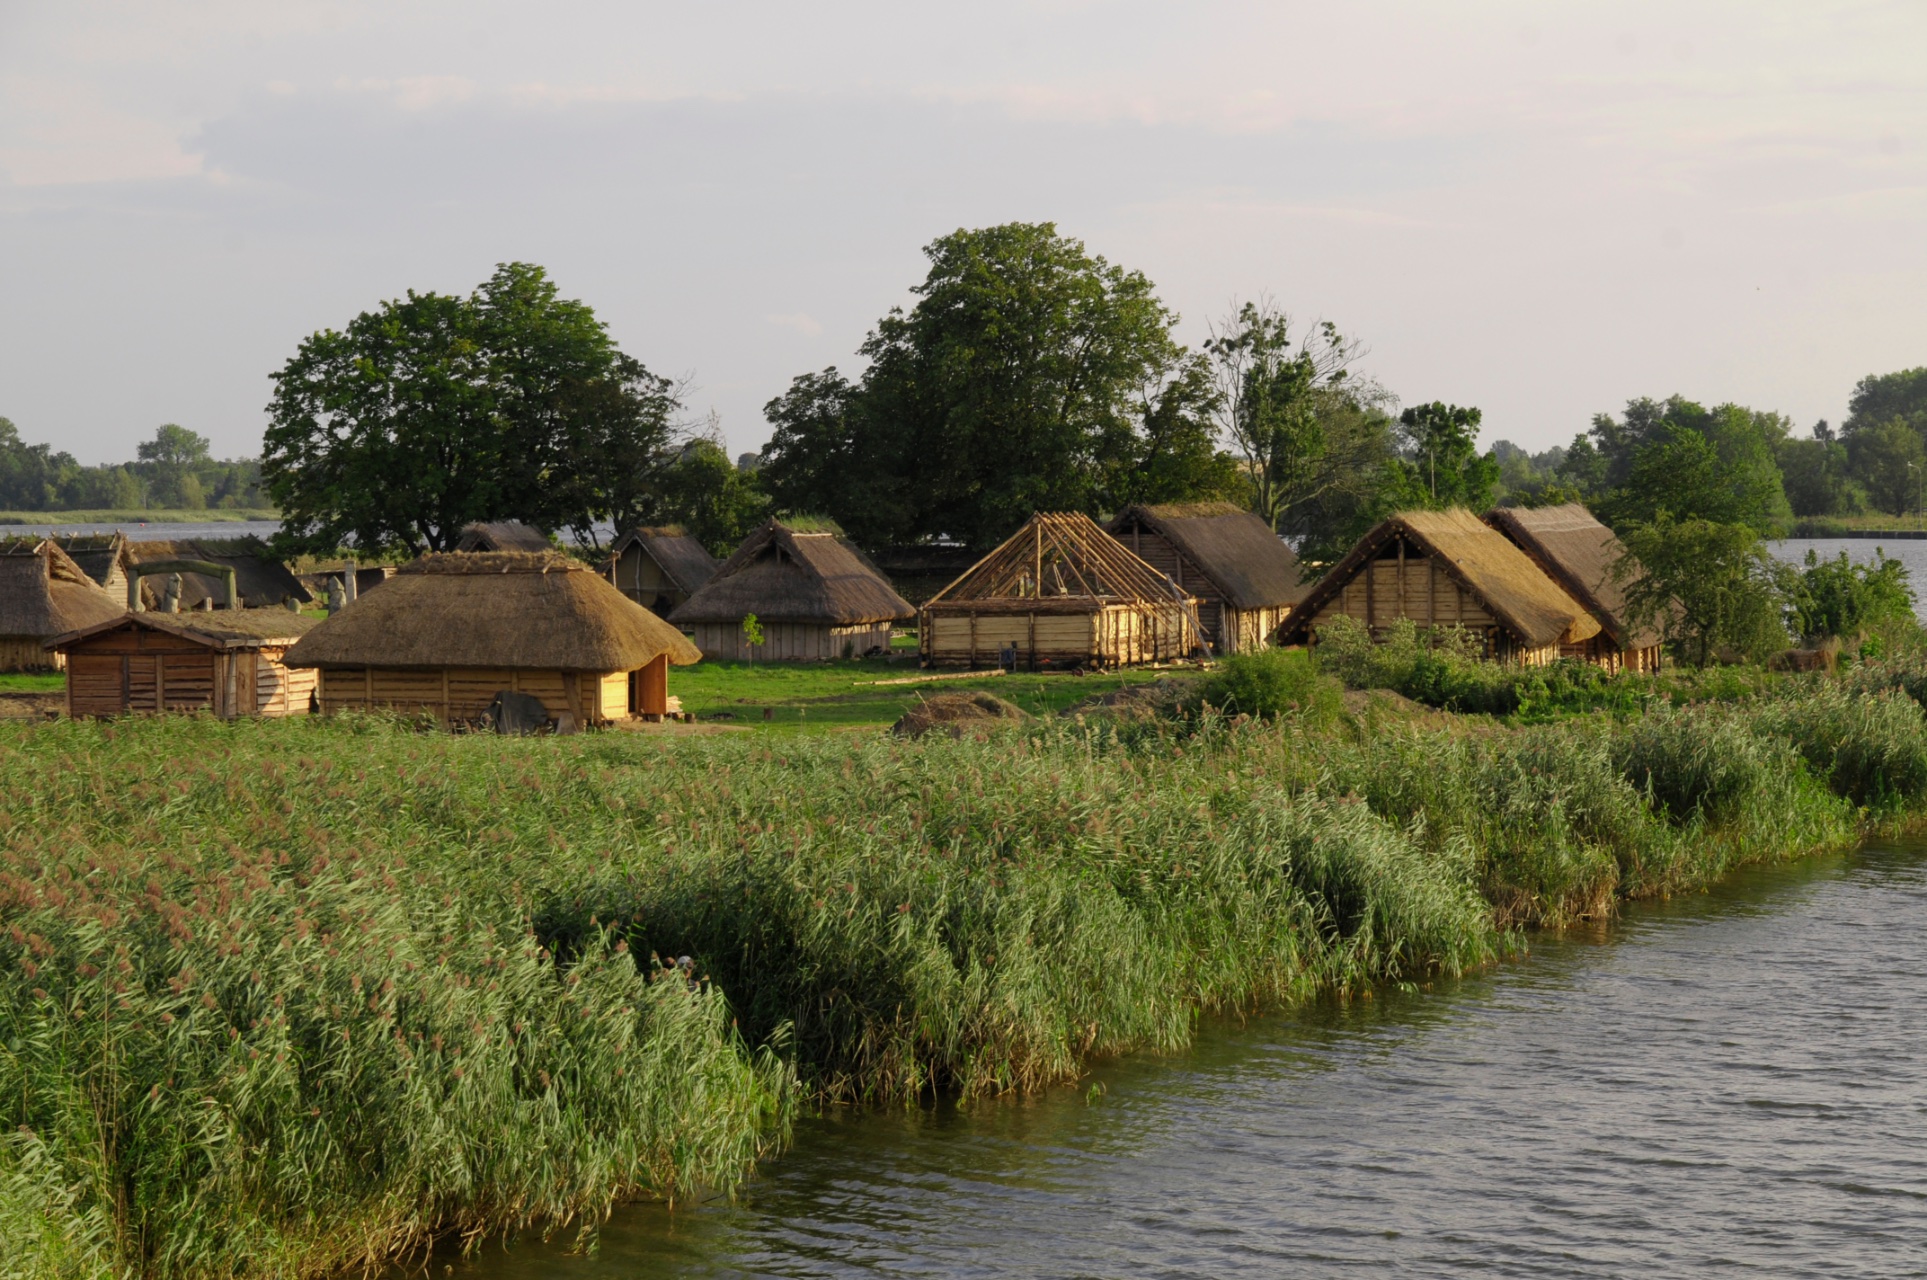 Open-air museum of Slavs and Vikings in Wolin